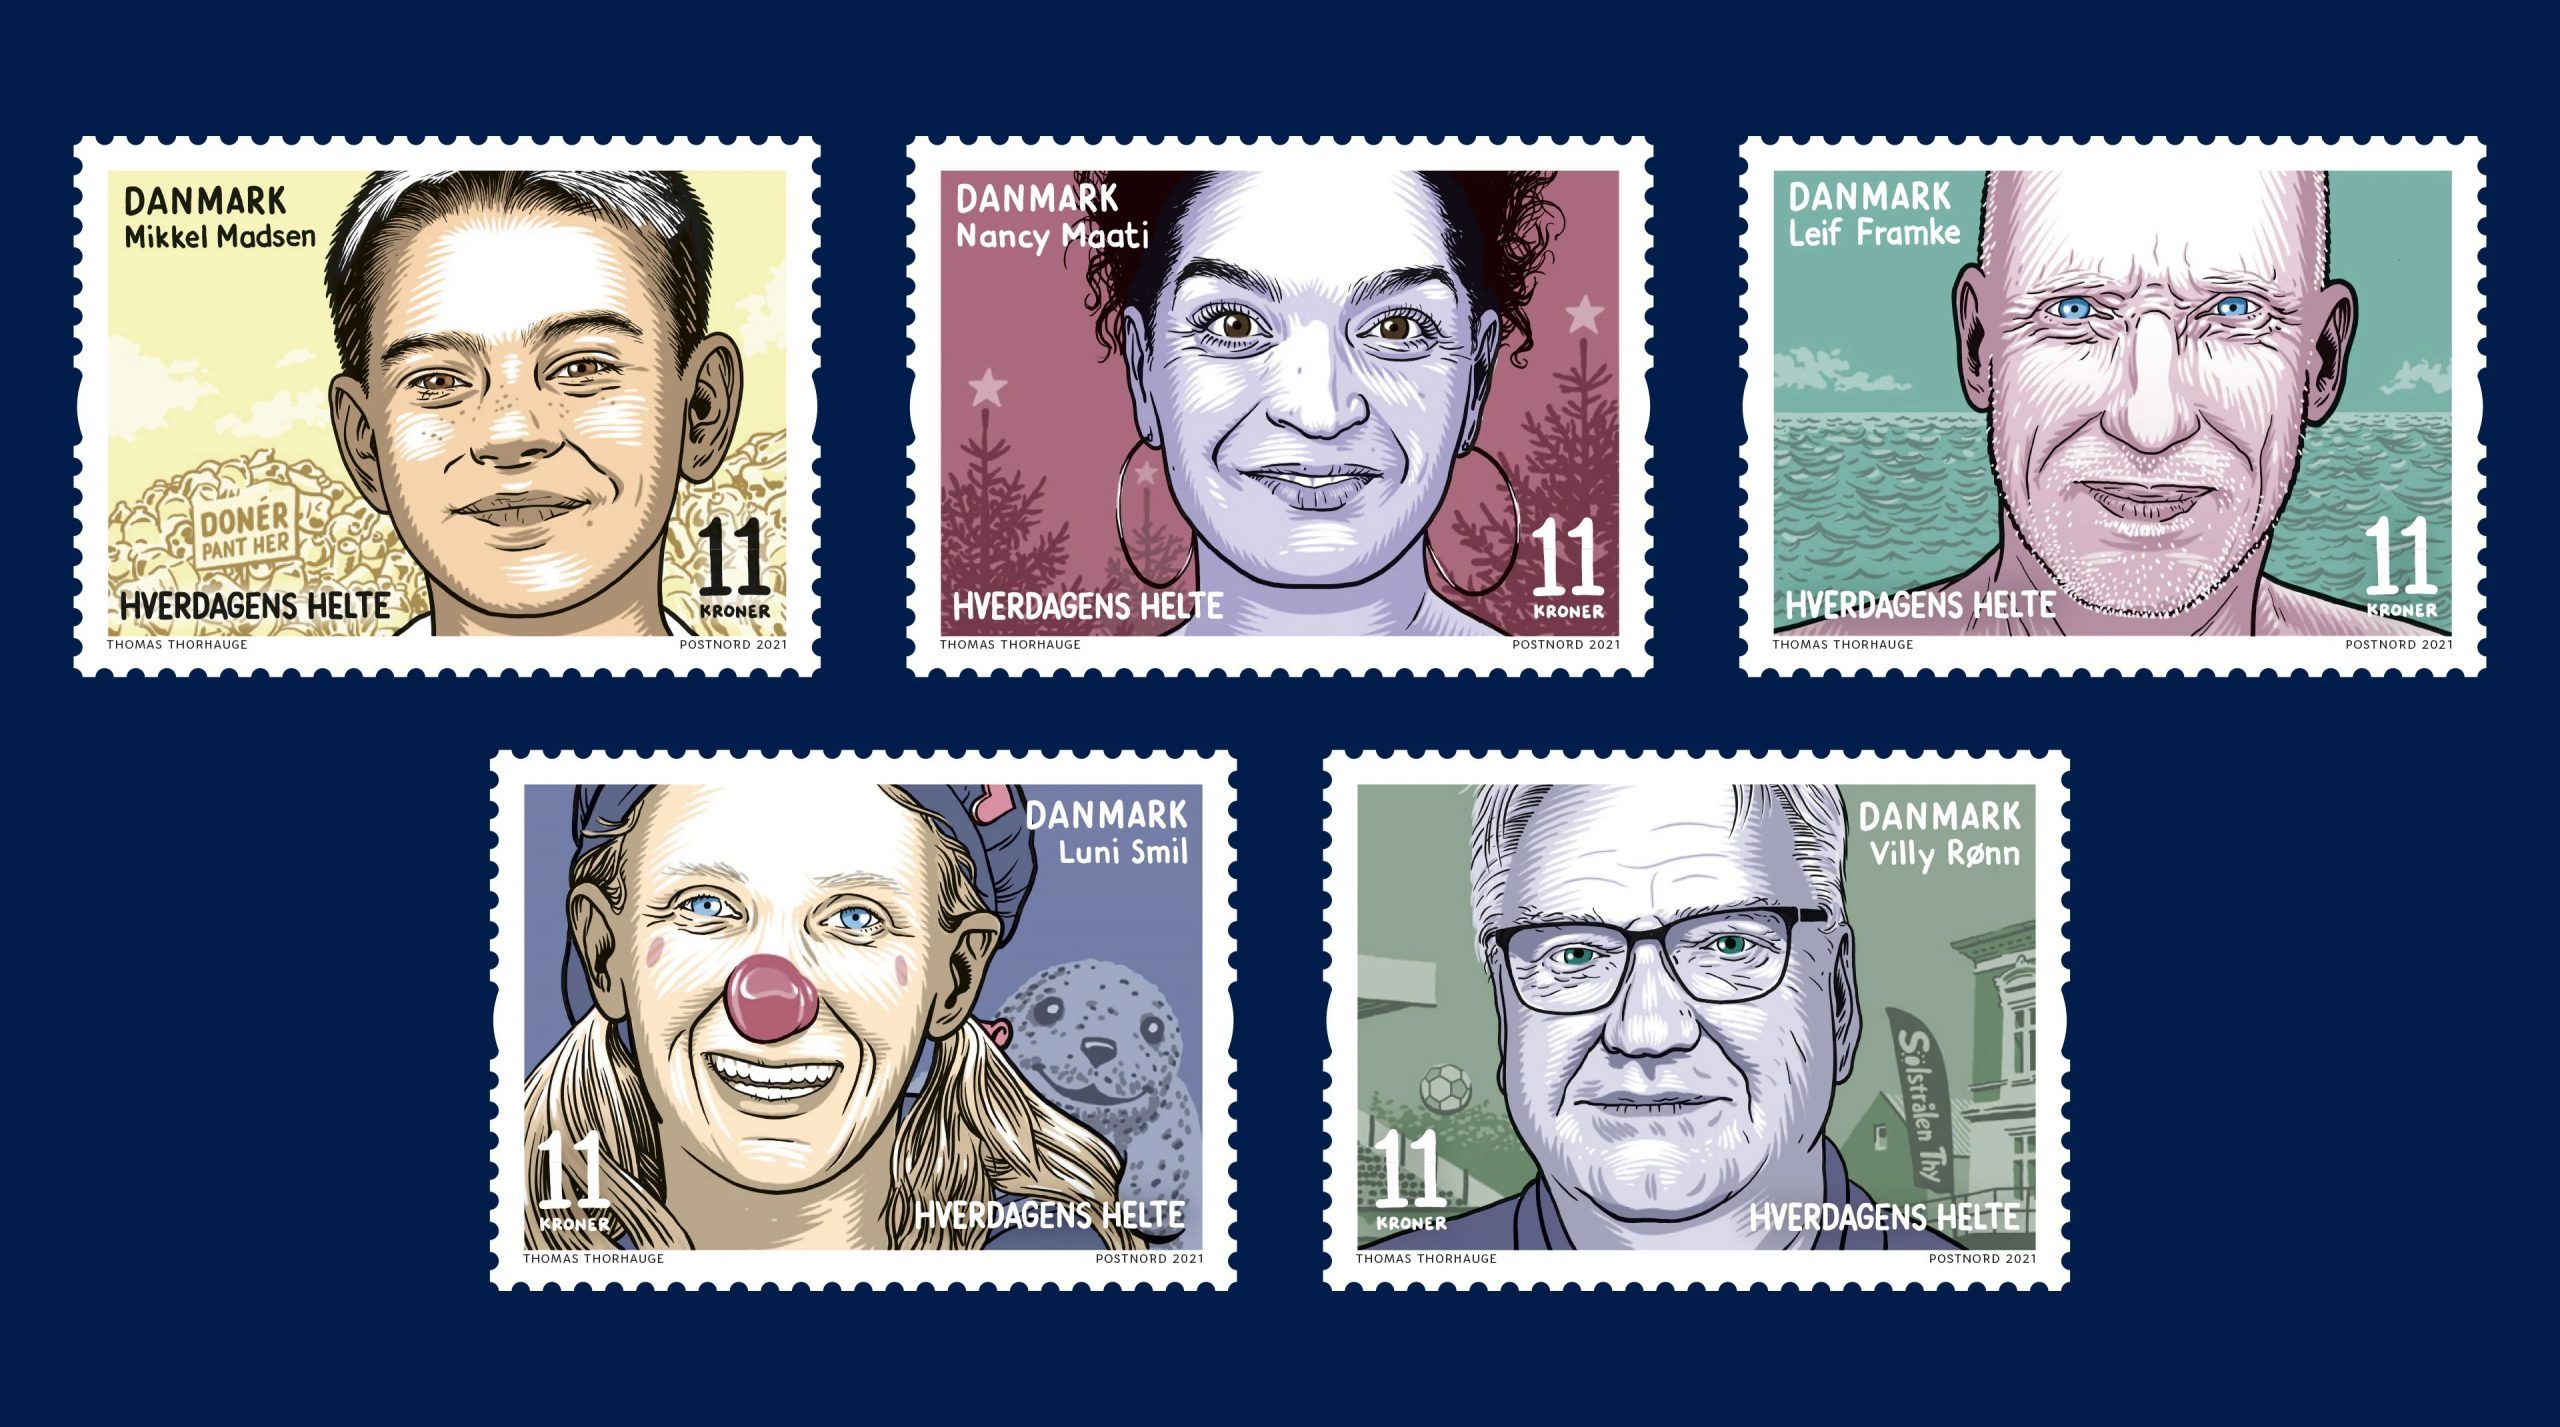 Culture Round-Up: Ordinary everyday hero Danes to appear on range of stamps